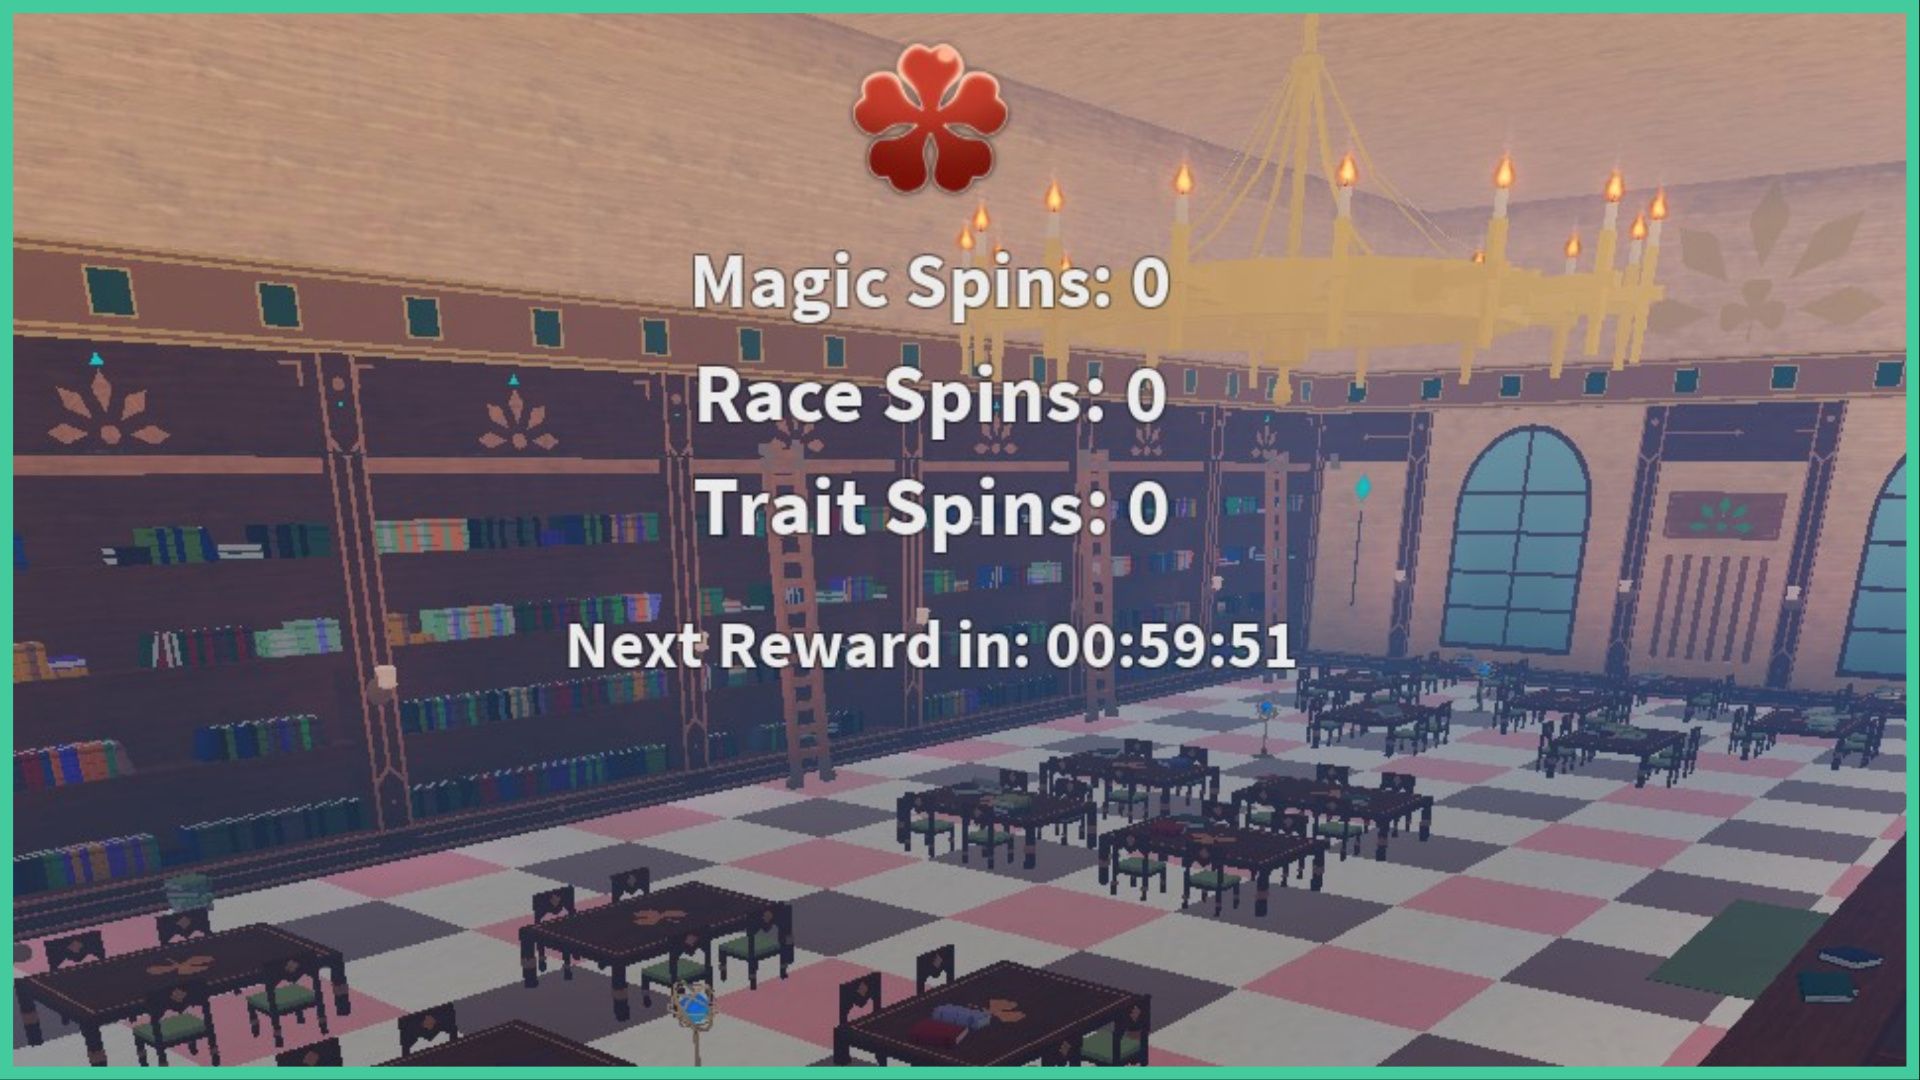 feature image for our clover retribution library guide, the image features a screenshot of the library screen from the game, with tables and chairs at desks, surrounded by tall bookcases with ladders and a large chandelier lit by candles, there is text on the screen that reads "magic spins 0, race spins 0, traits spins 0", this is to show how many spins the player has obtained while AFK, there is also a timer that is counting down when the next reward is, which is just under an hour